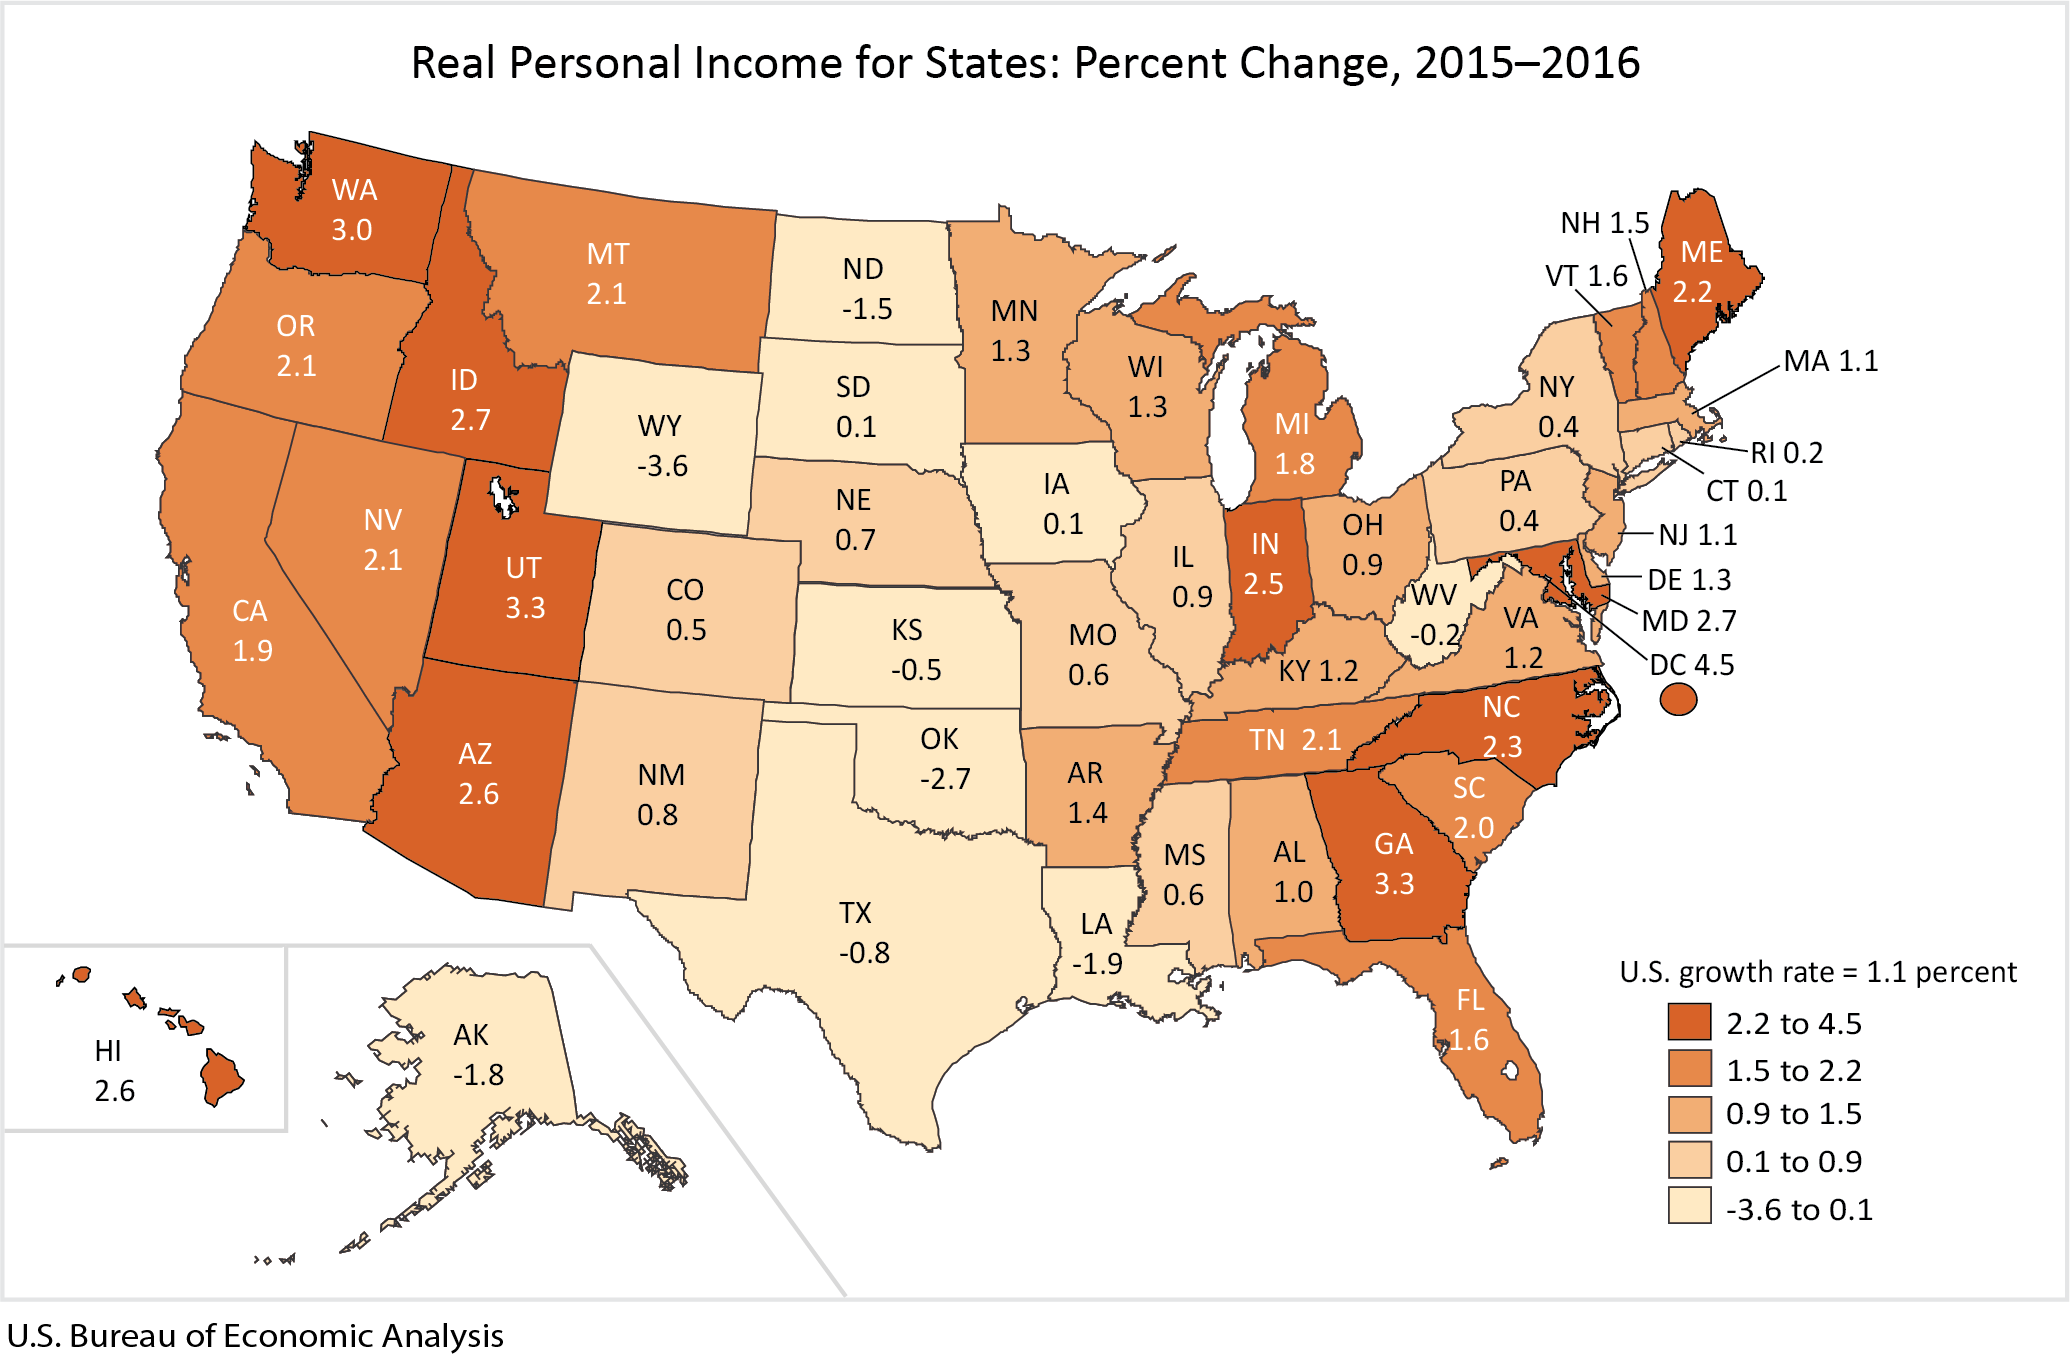 Real Personal Income for States and Metropolitan Areas, 2016 Map